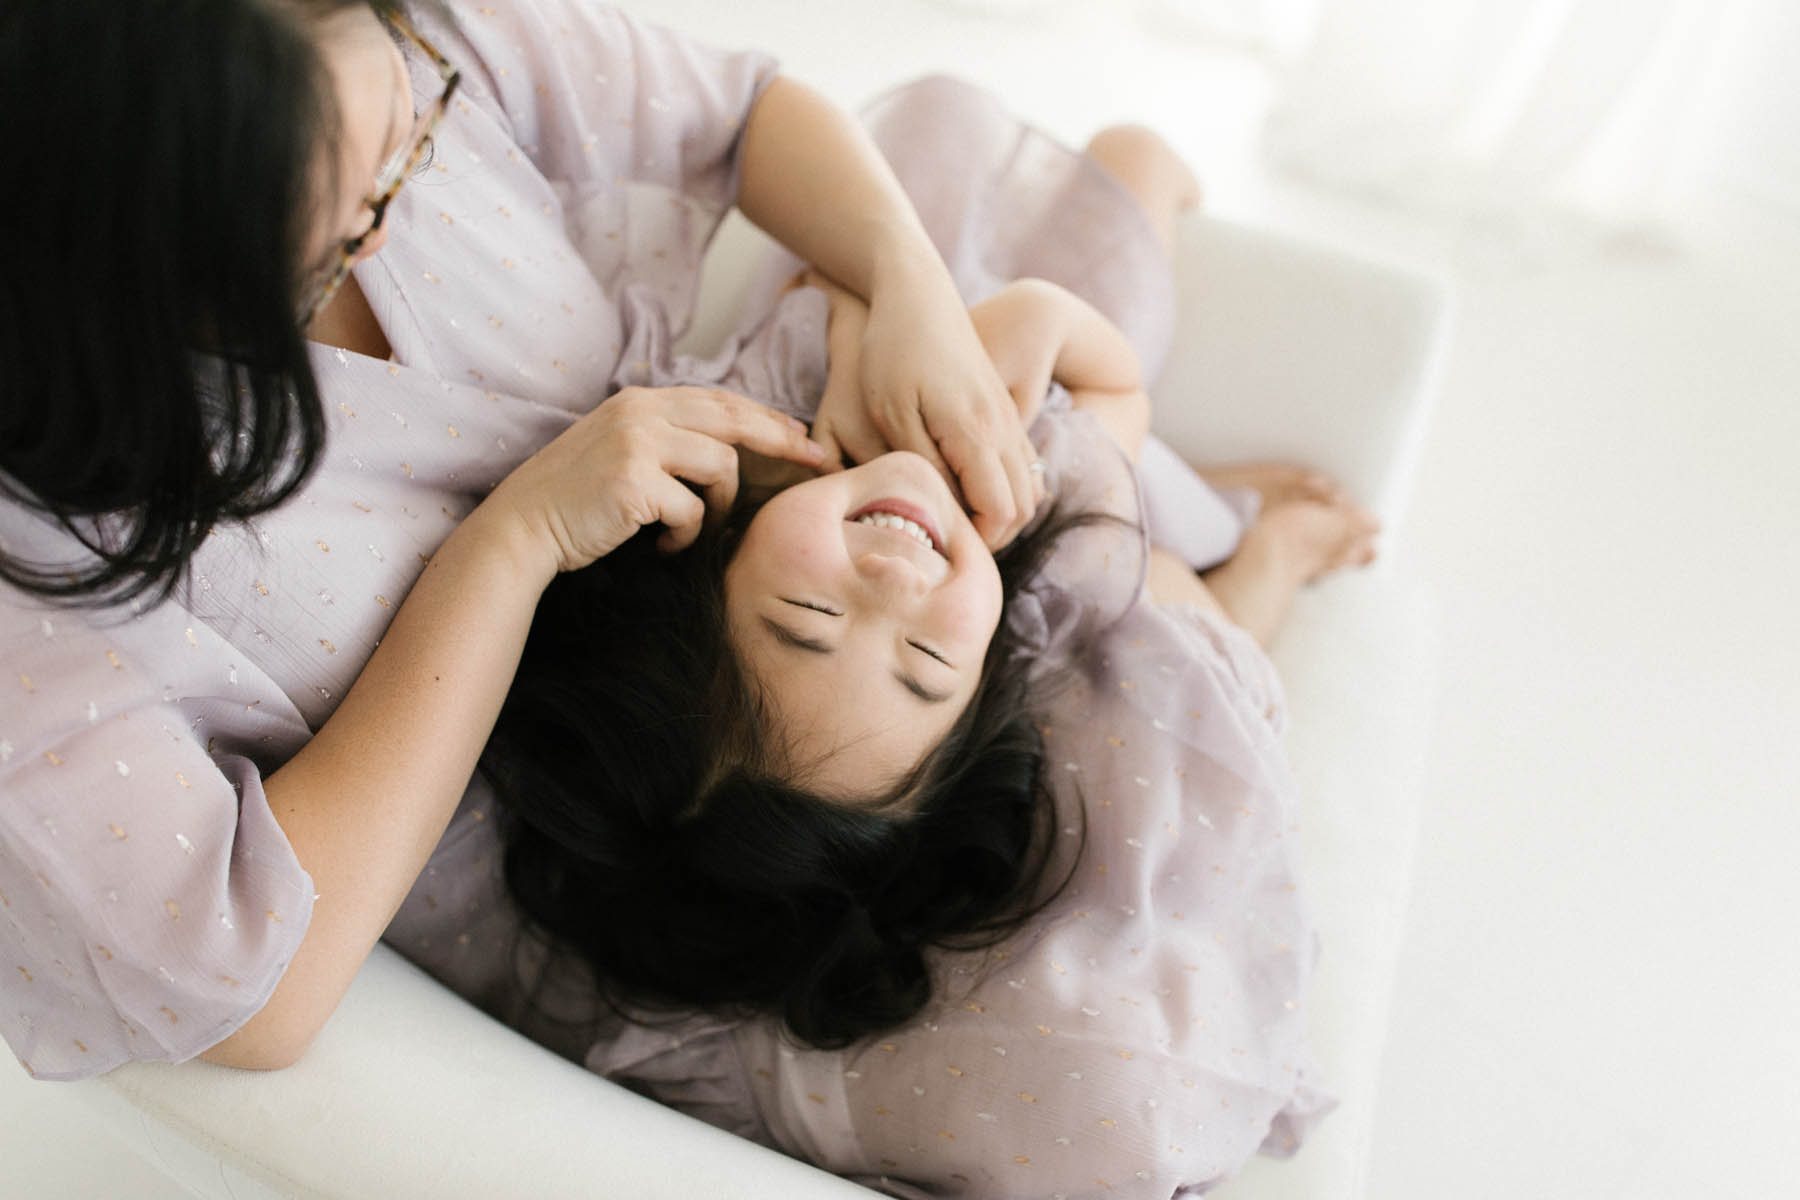 Chicago Child Photographers, Laurie Baker captures mother and daughter laughing and tickling